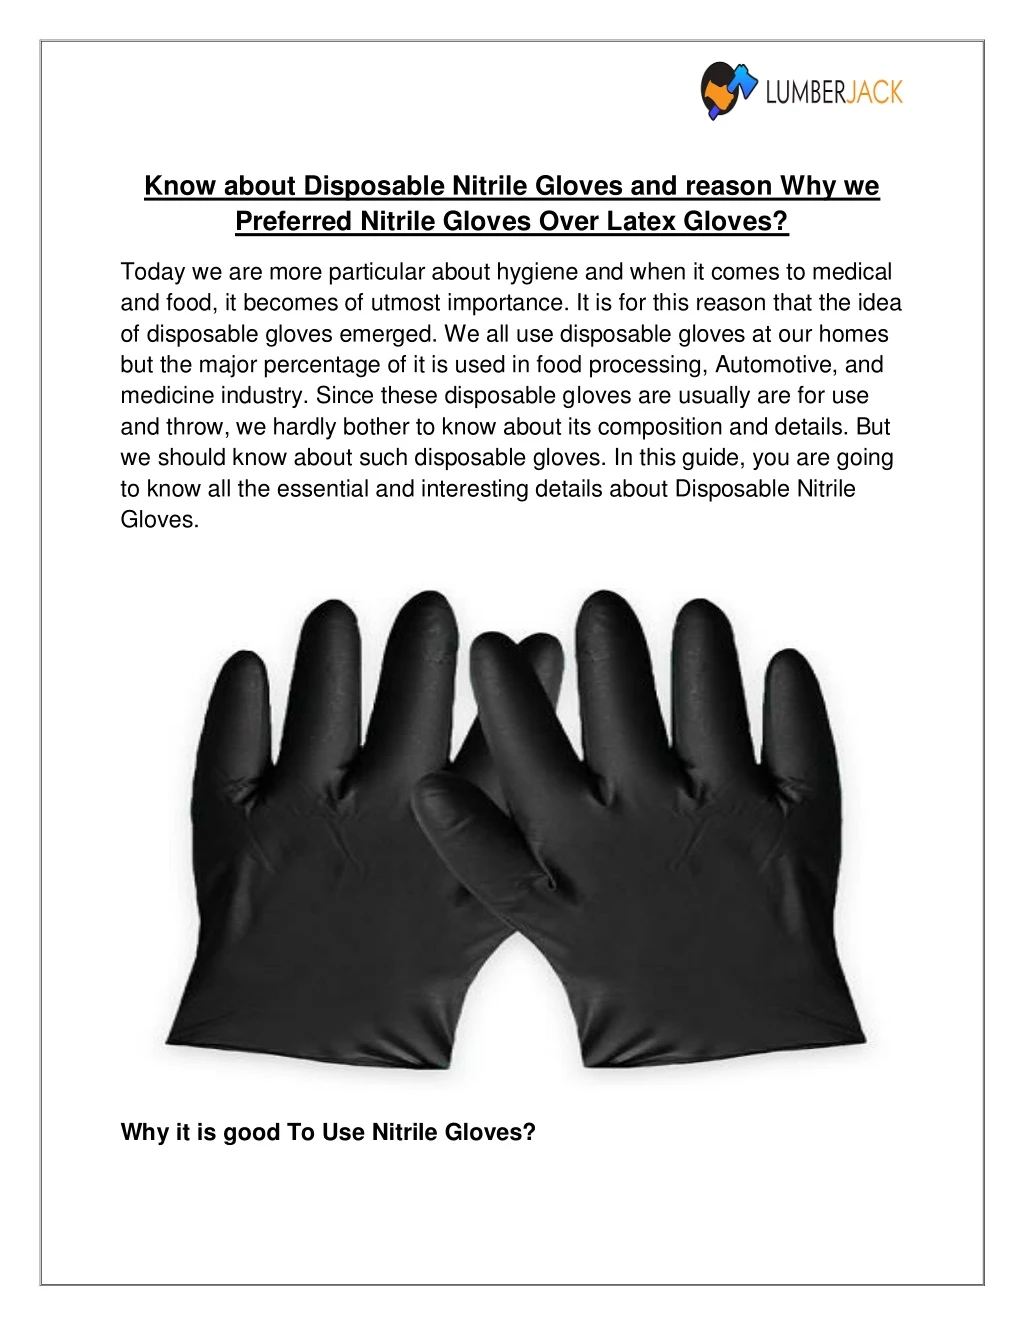 know about disposable nitrile gloves and reason n.